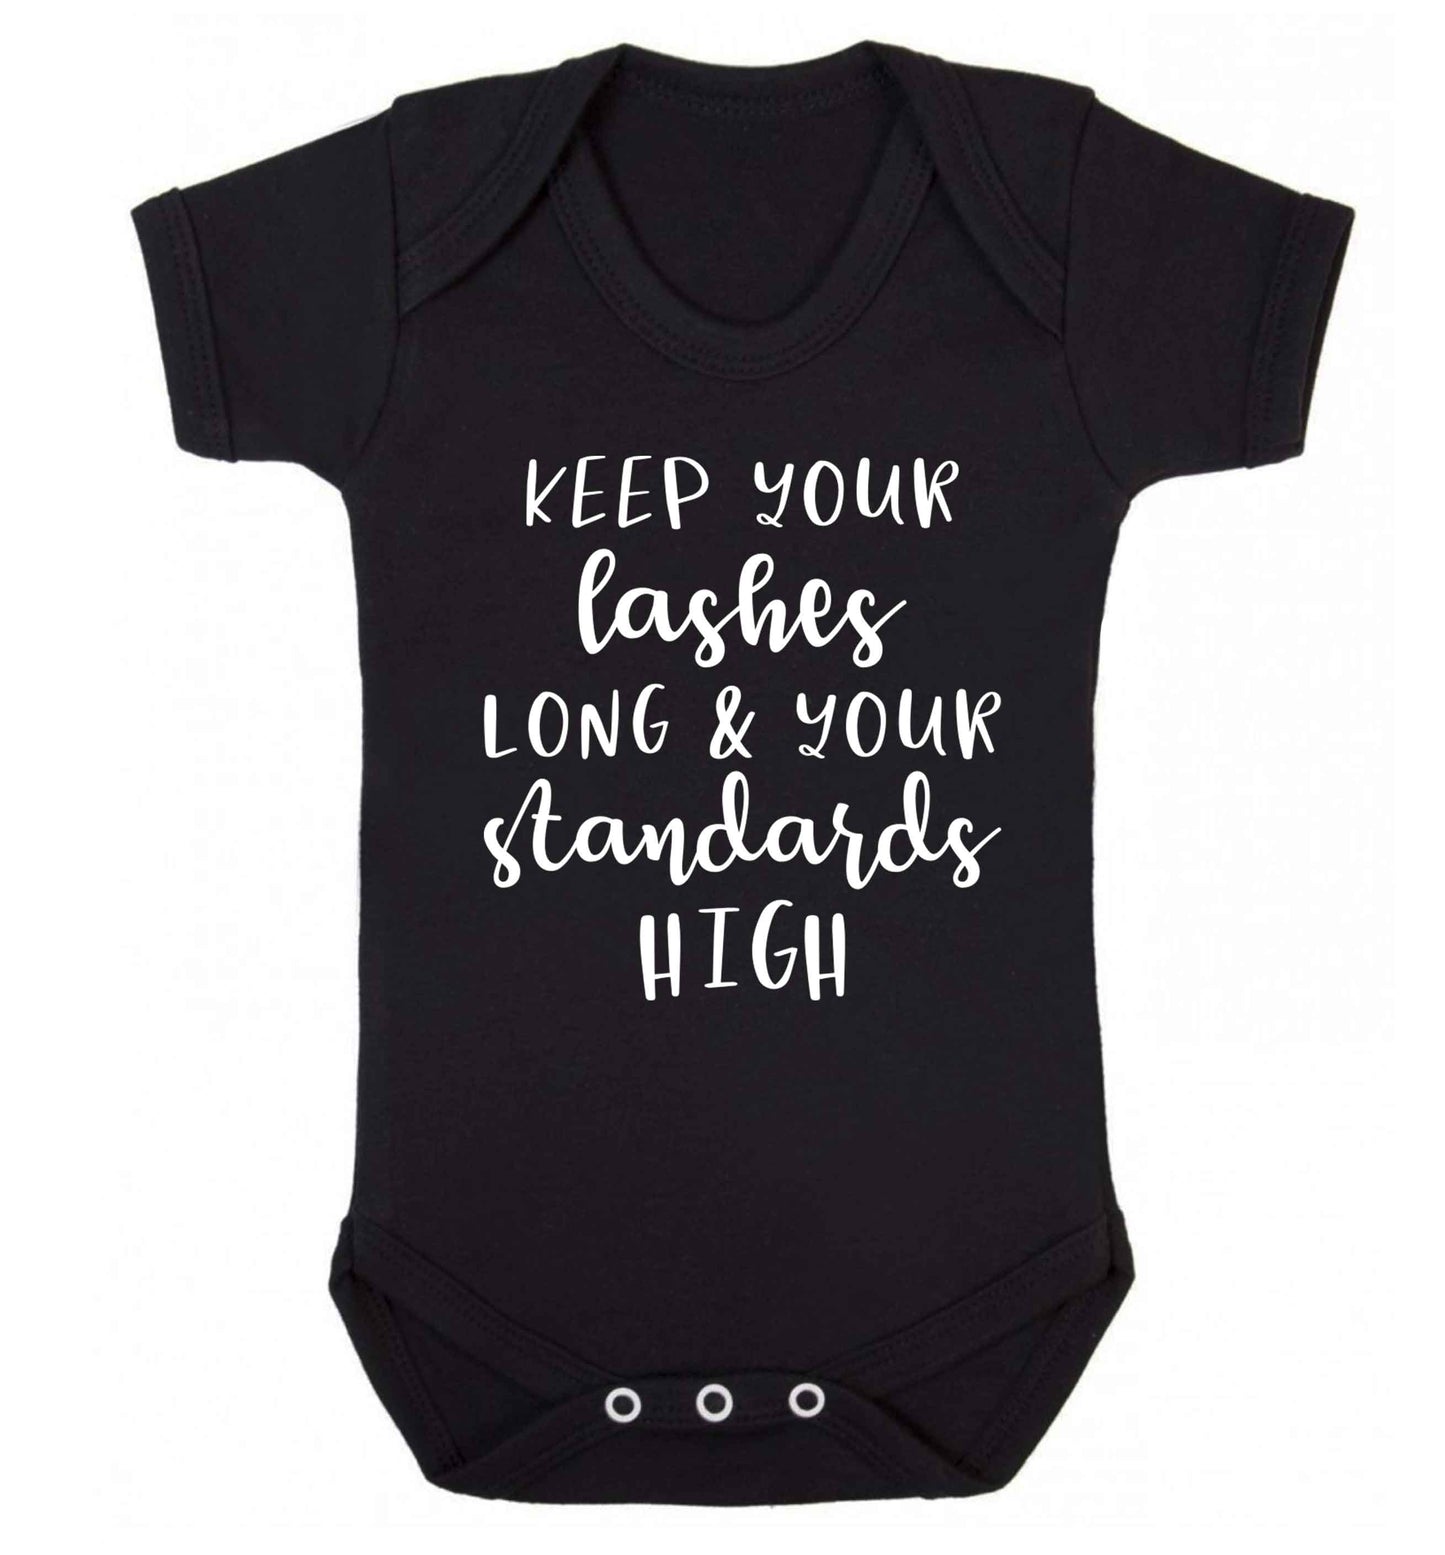 Keep your lashes long and your standards high Baby Vest black 18-24 months